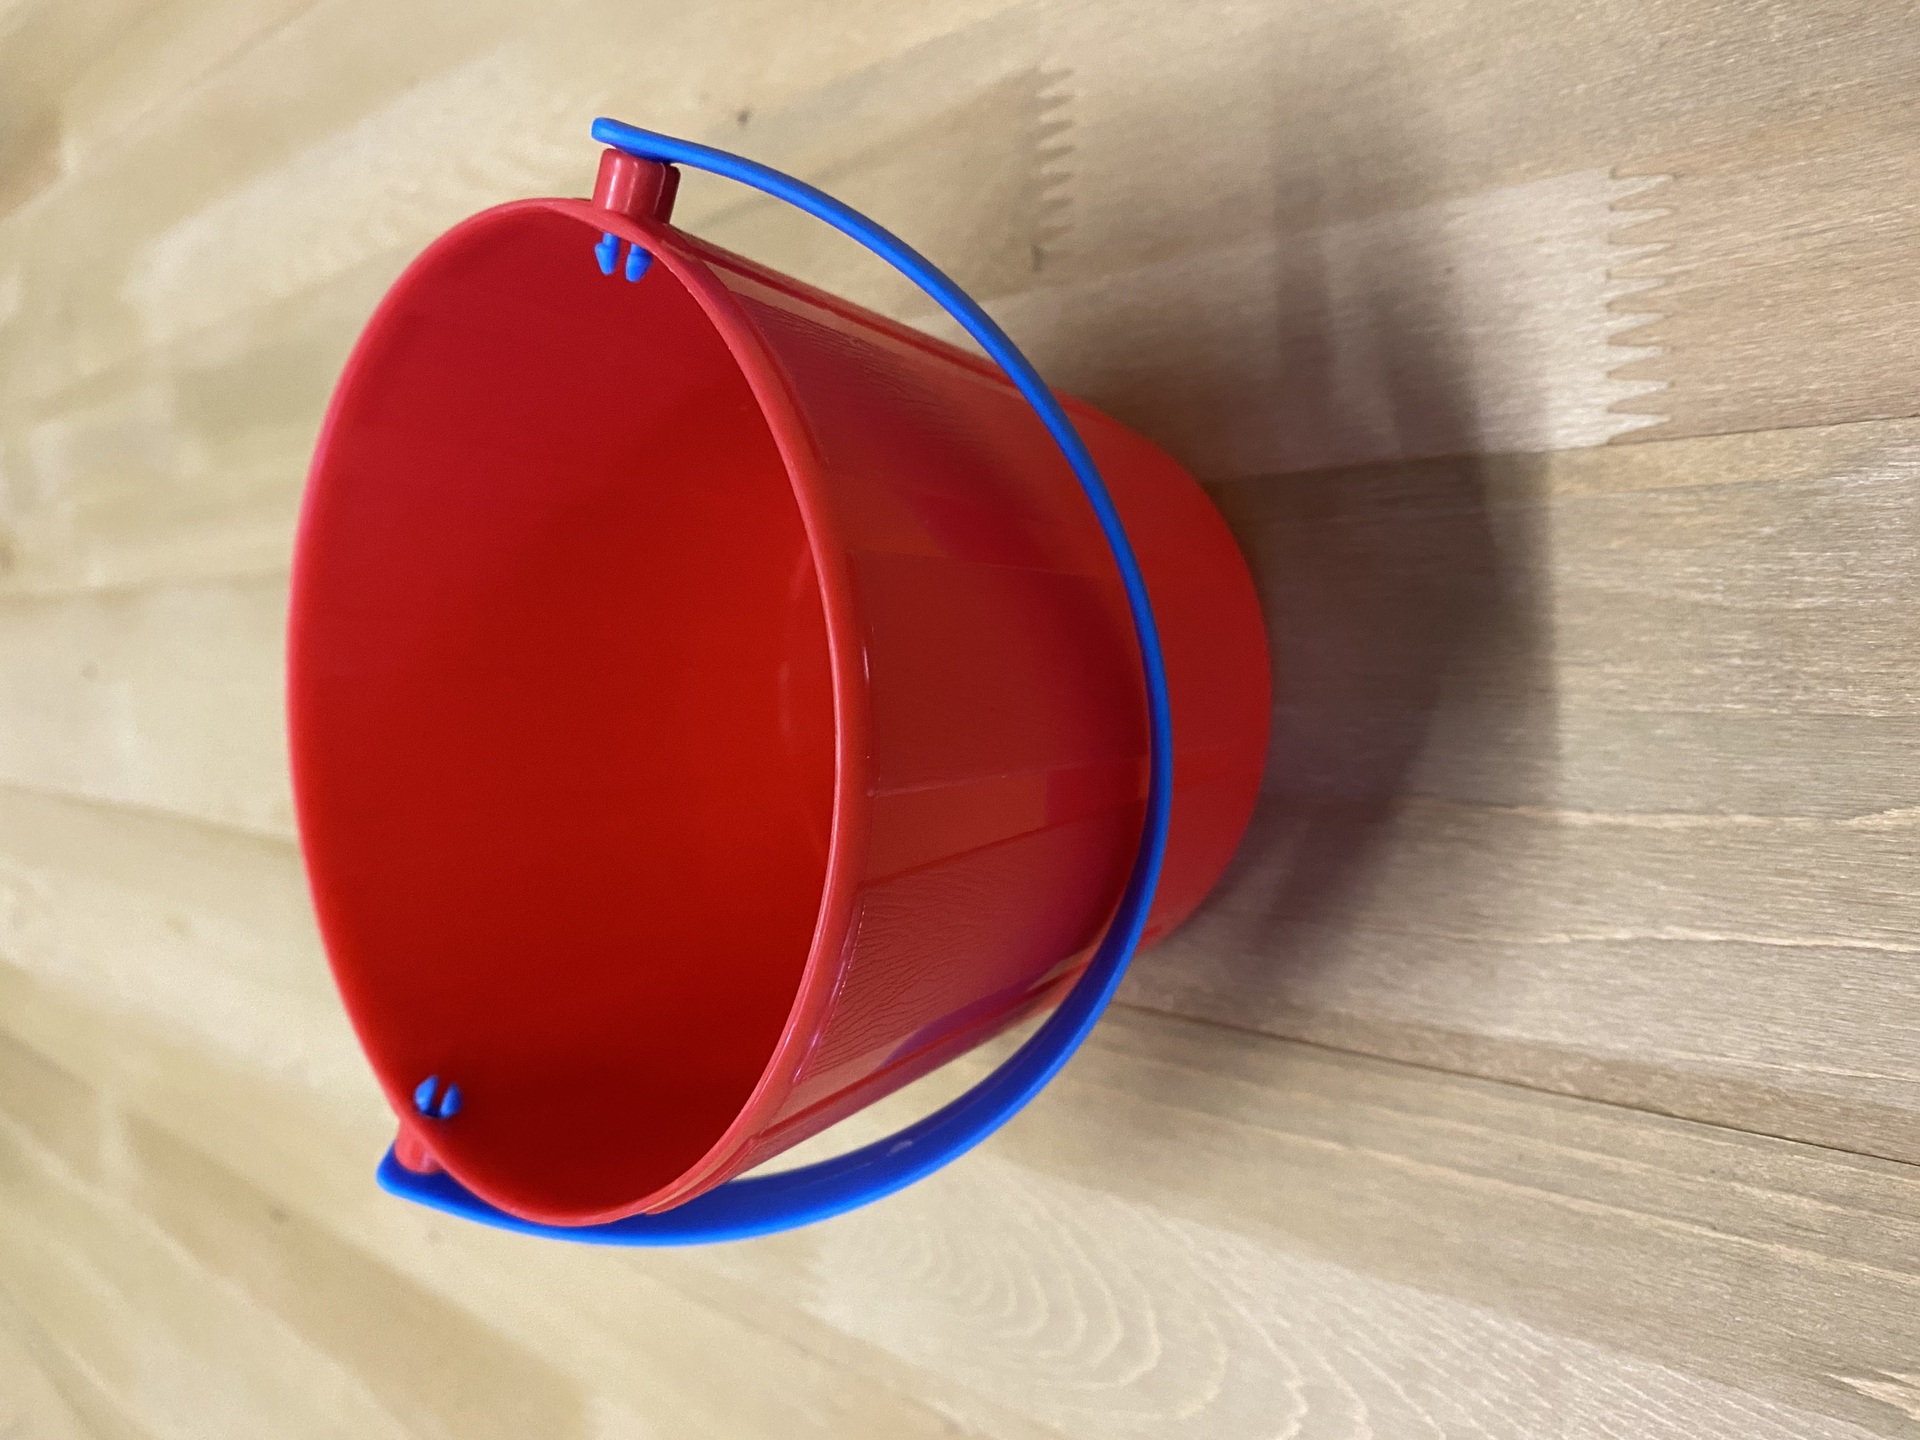 Bucket - Colour may vary Image